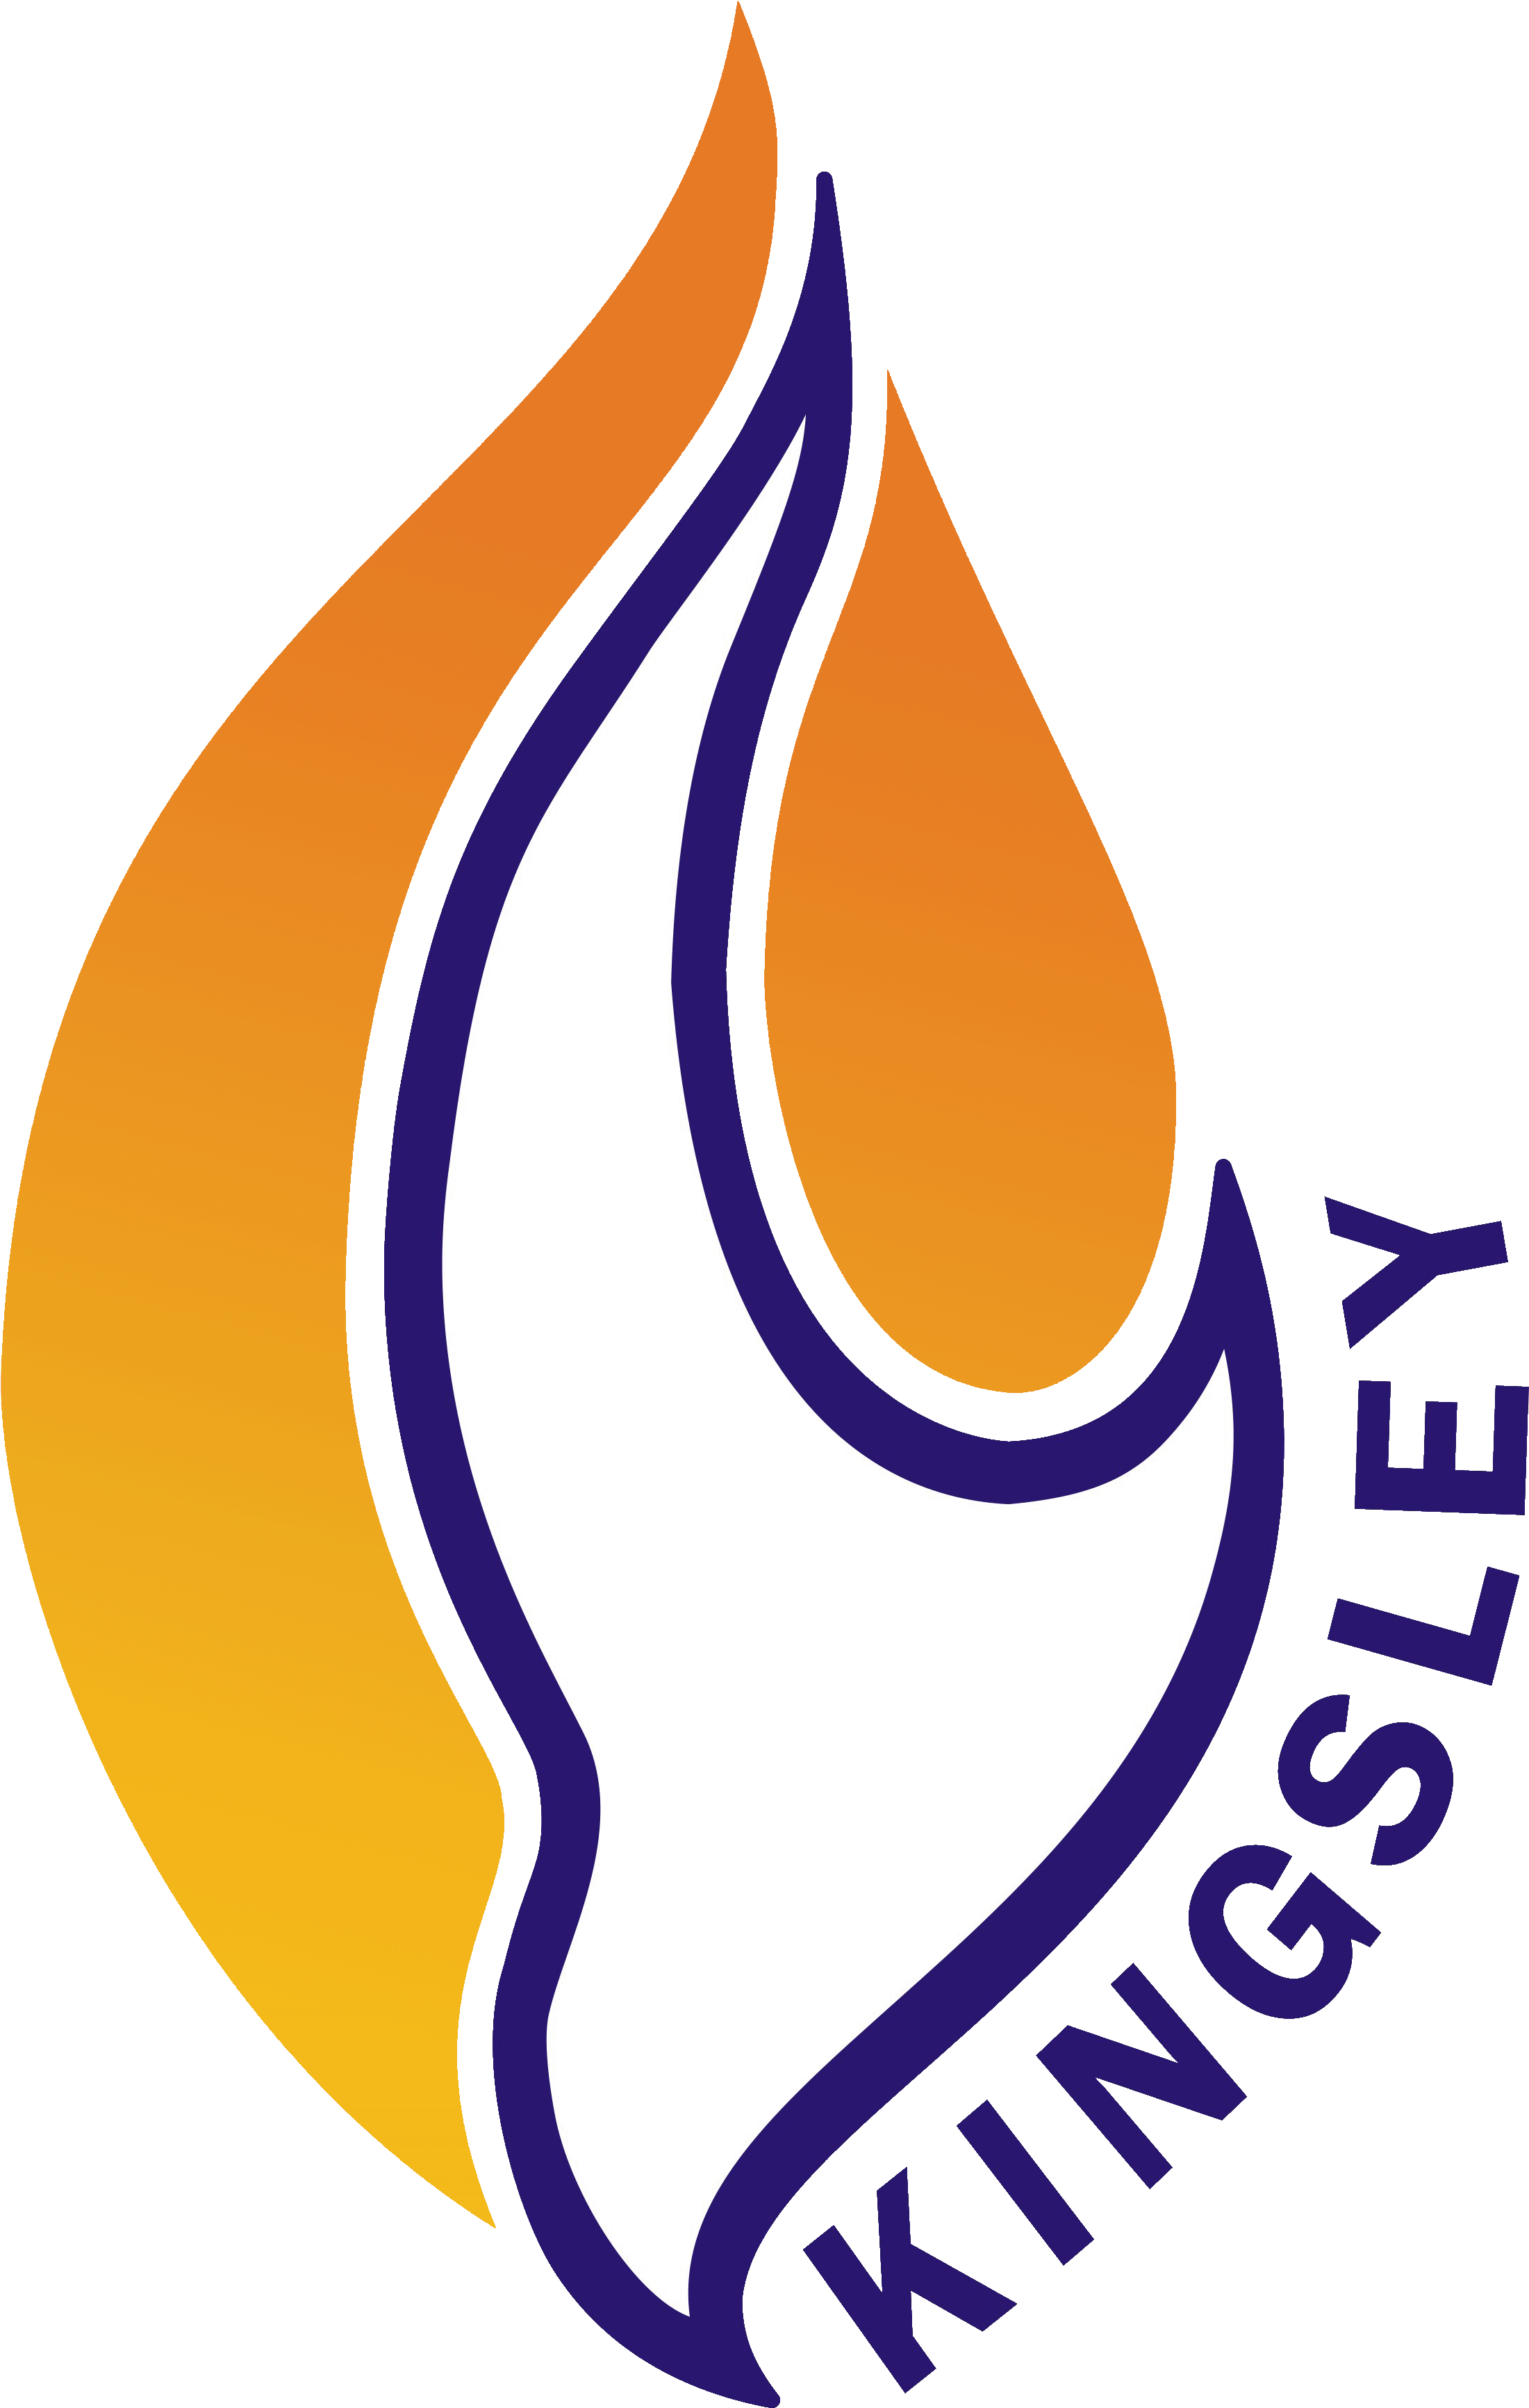 A Logo Of A Flame